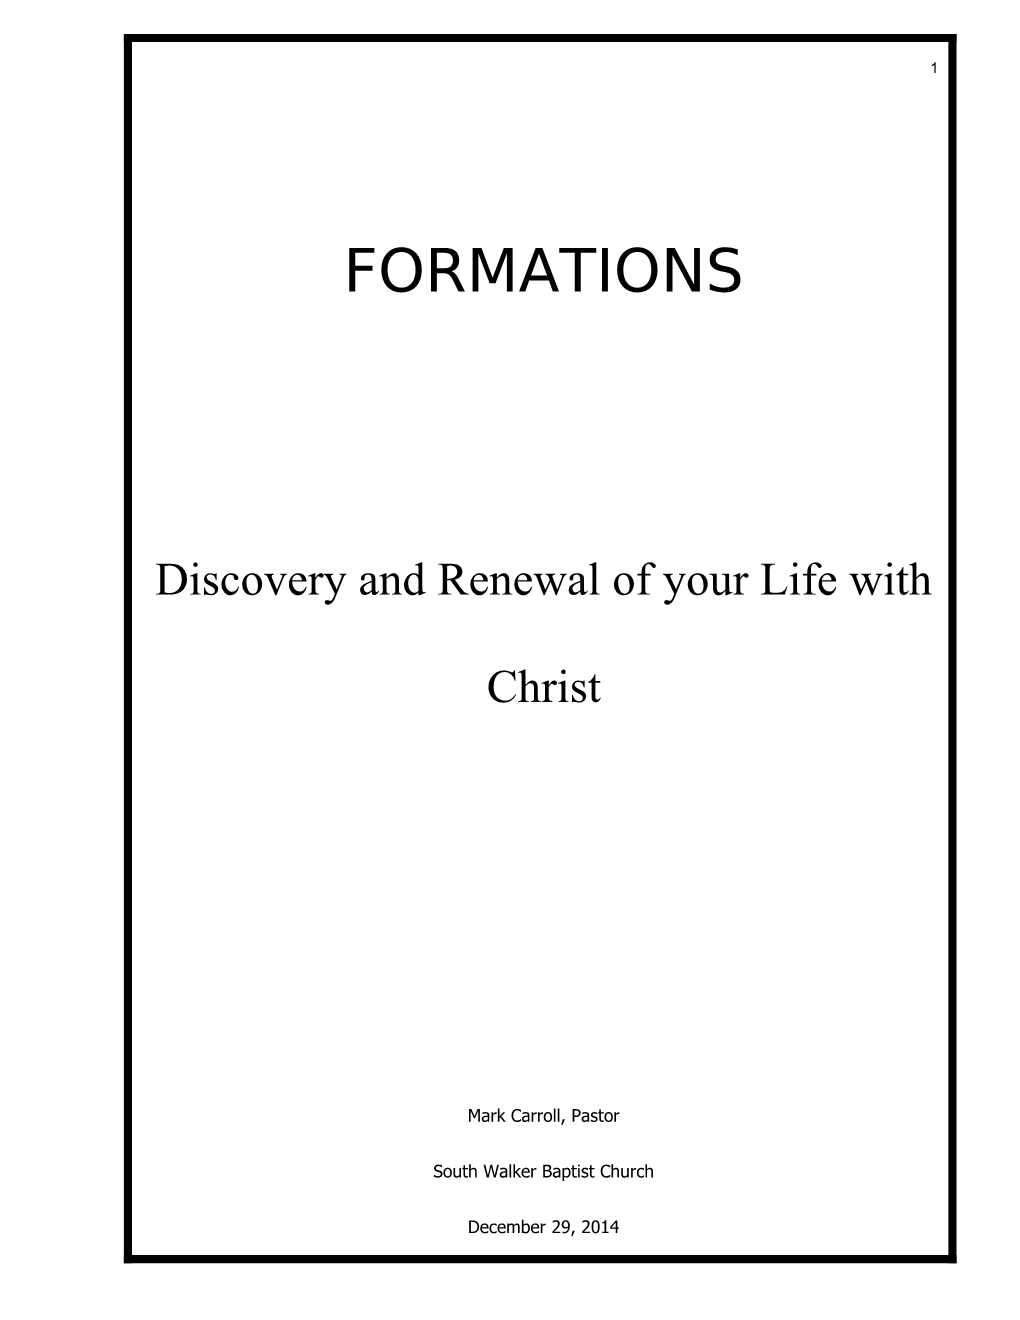 Discovery and Renewal of Your Life with Christ